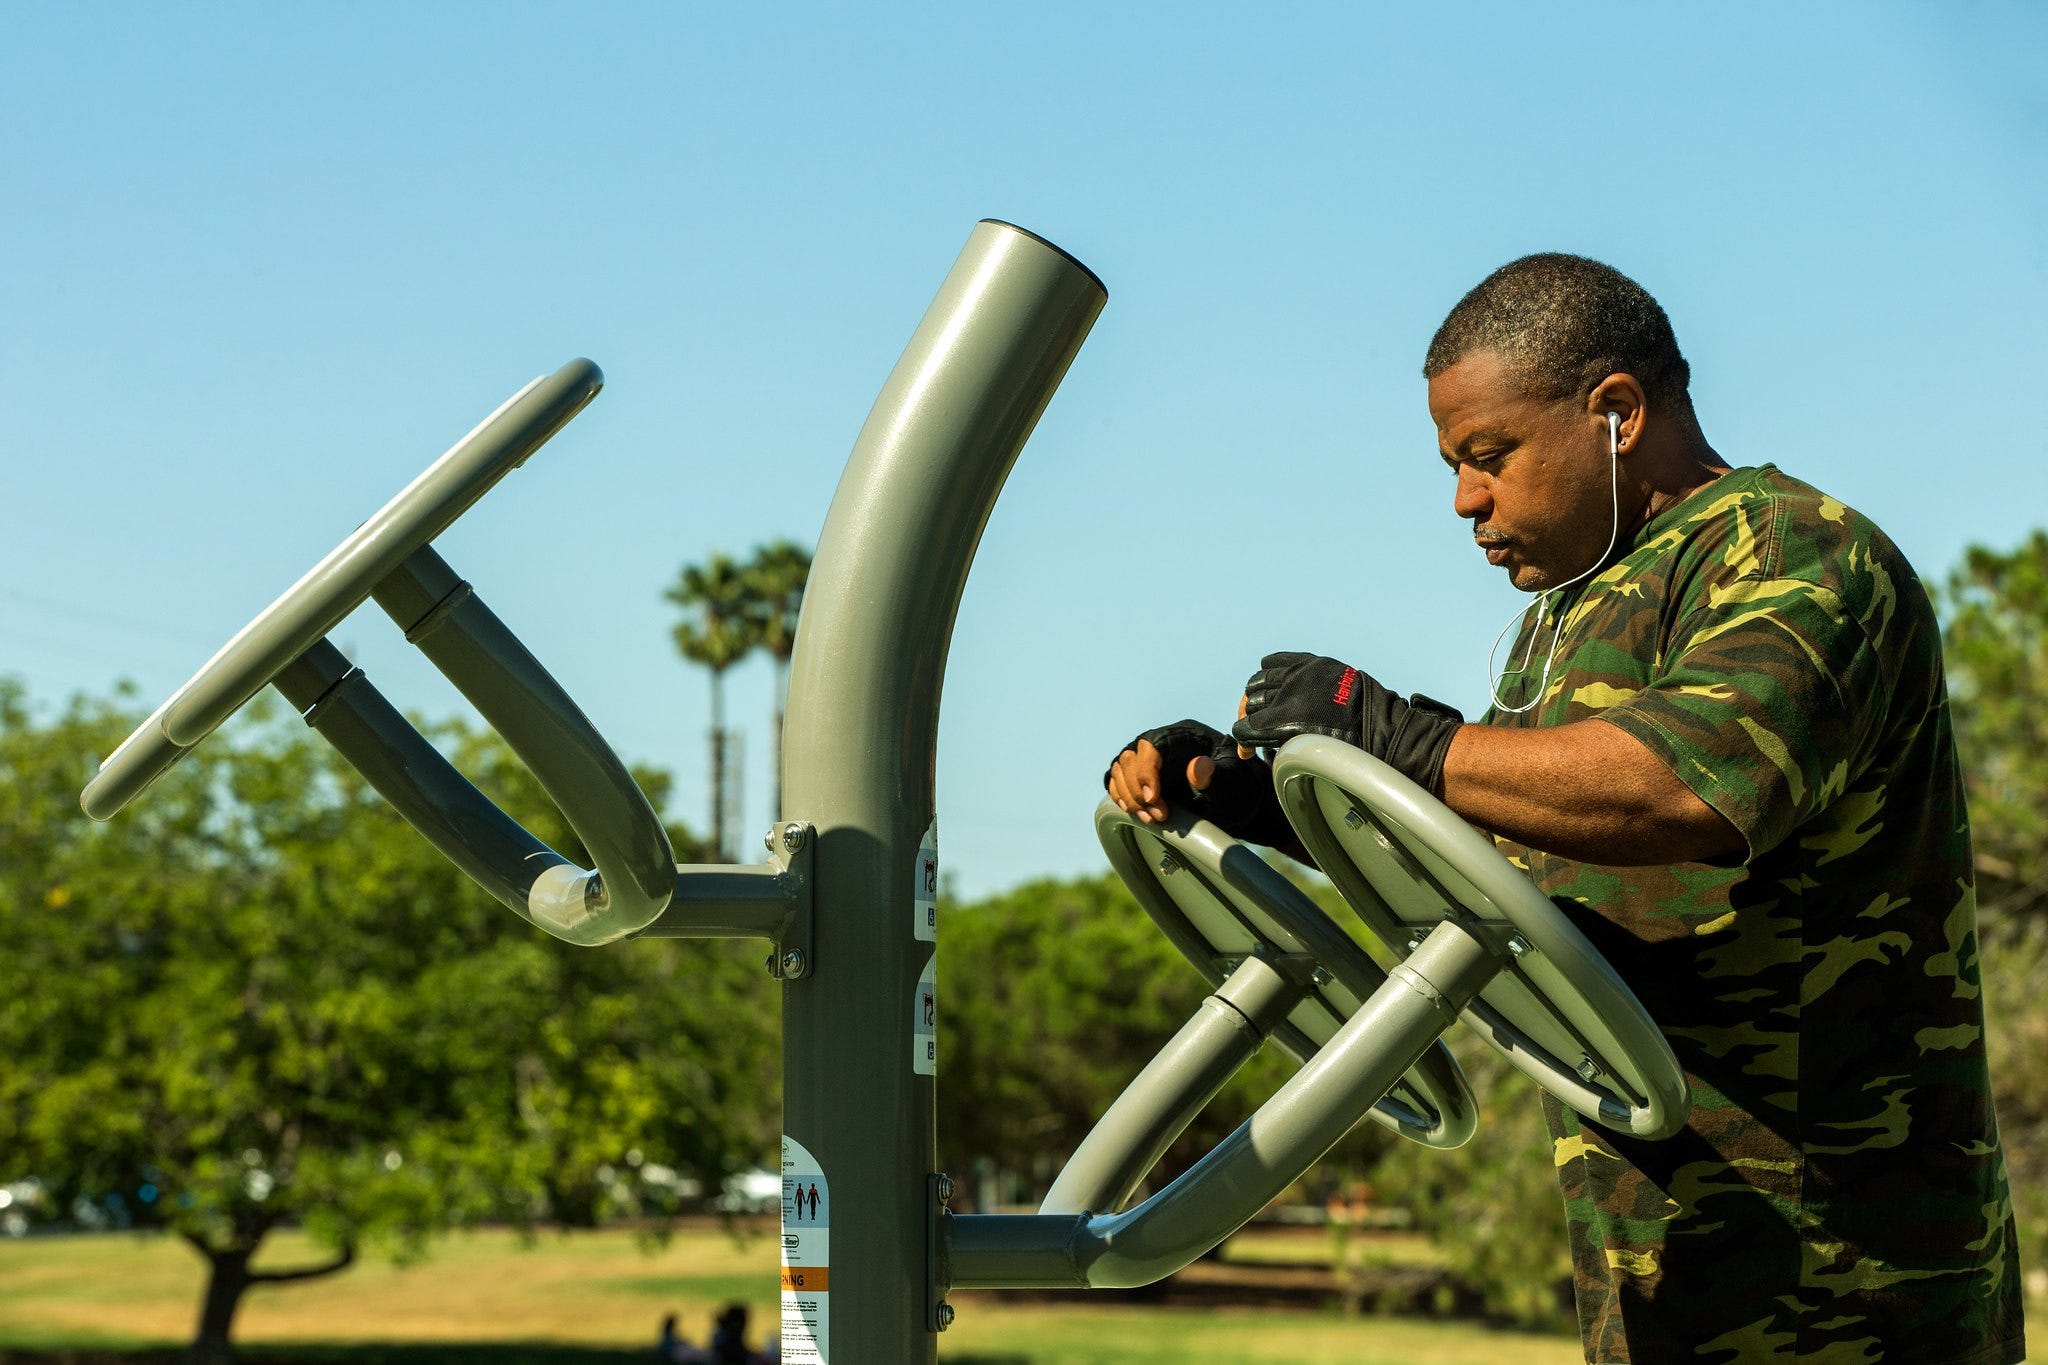 Man working out in a GameTime outdoor fitness park